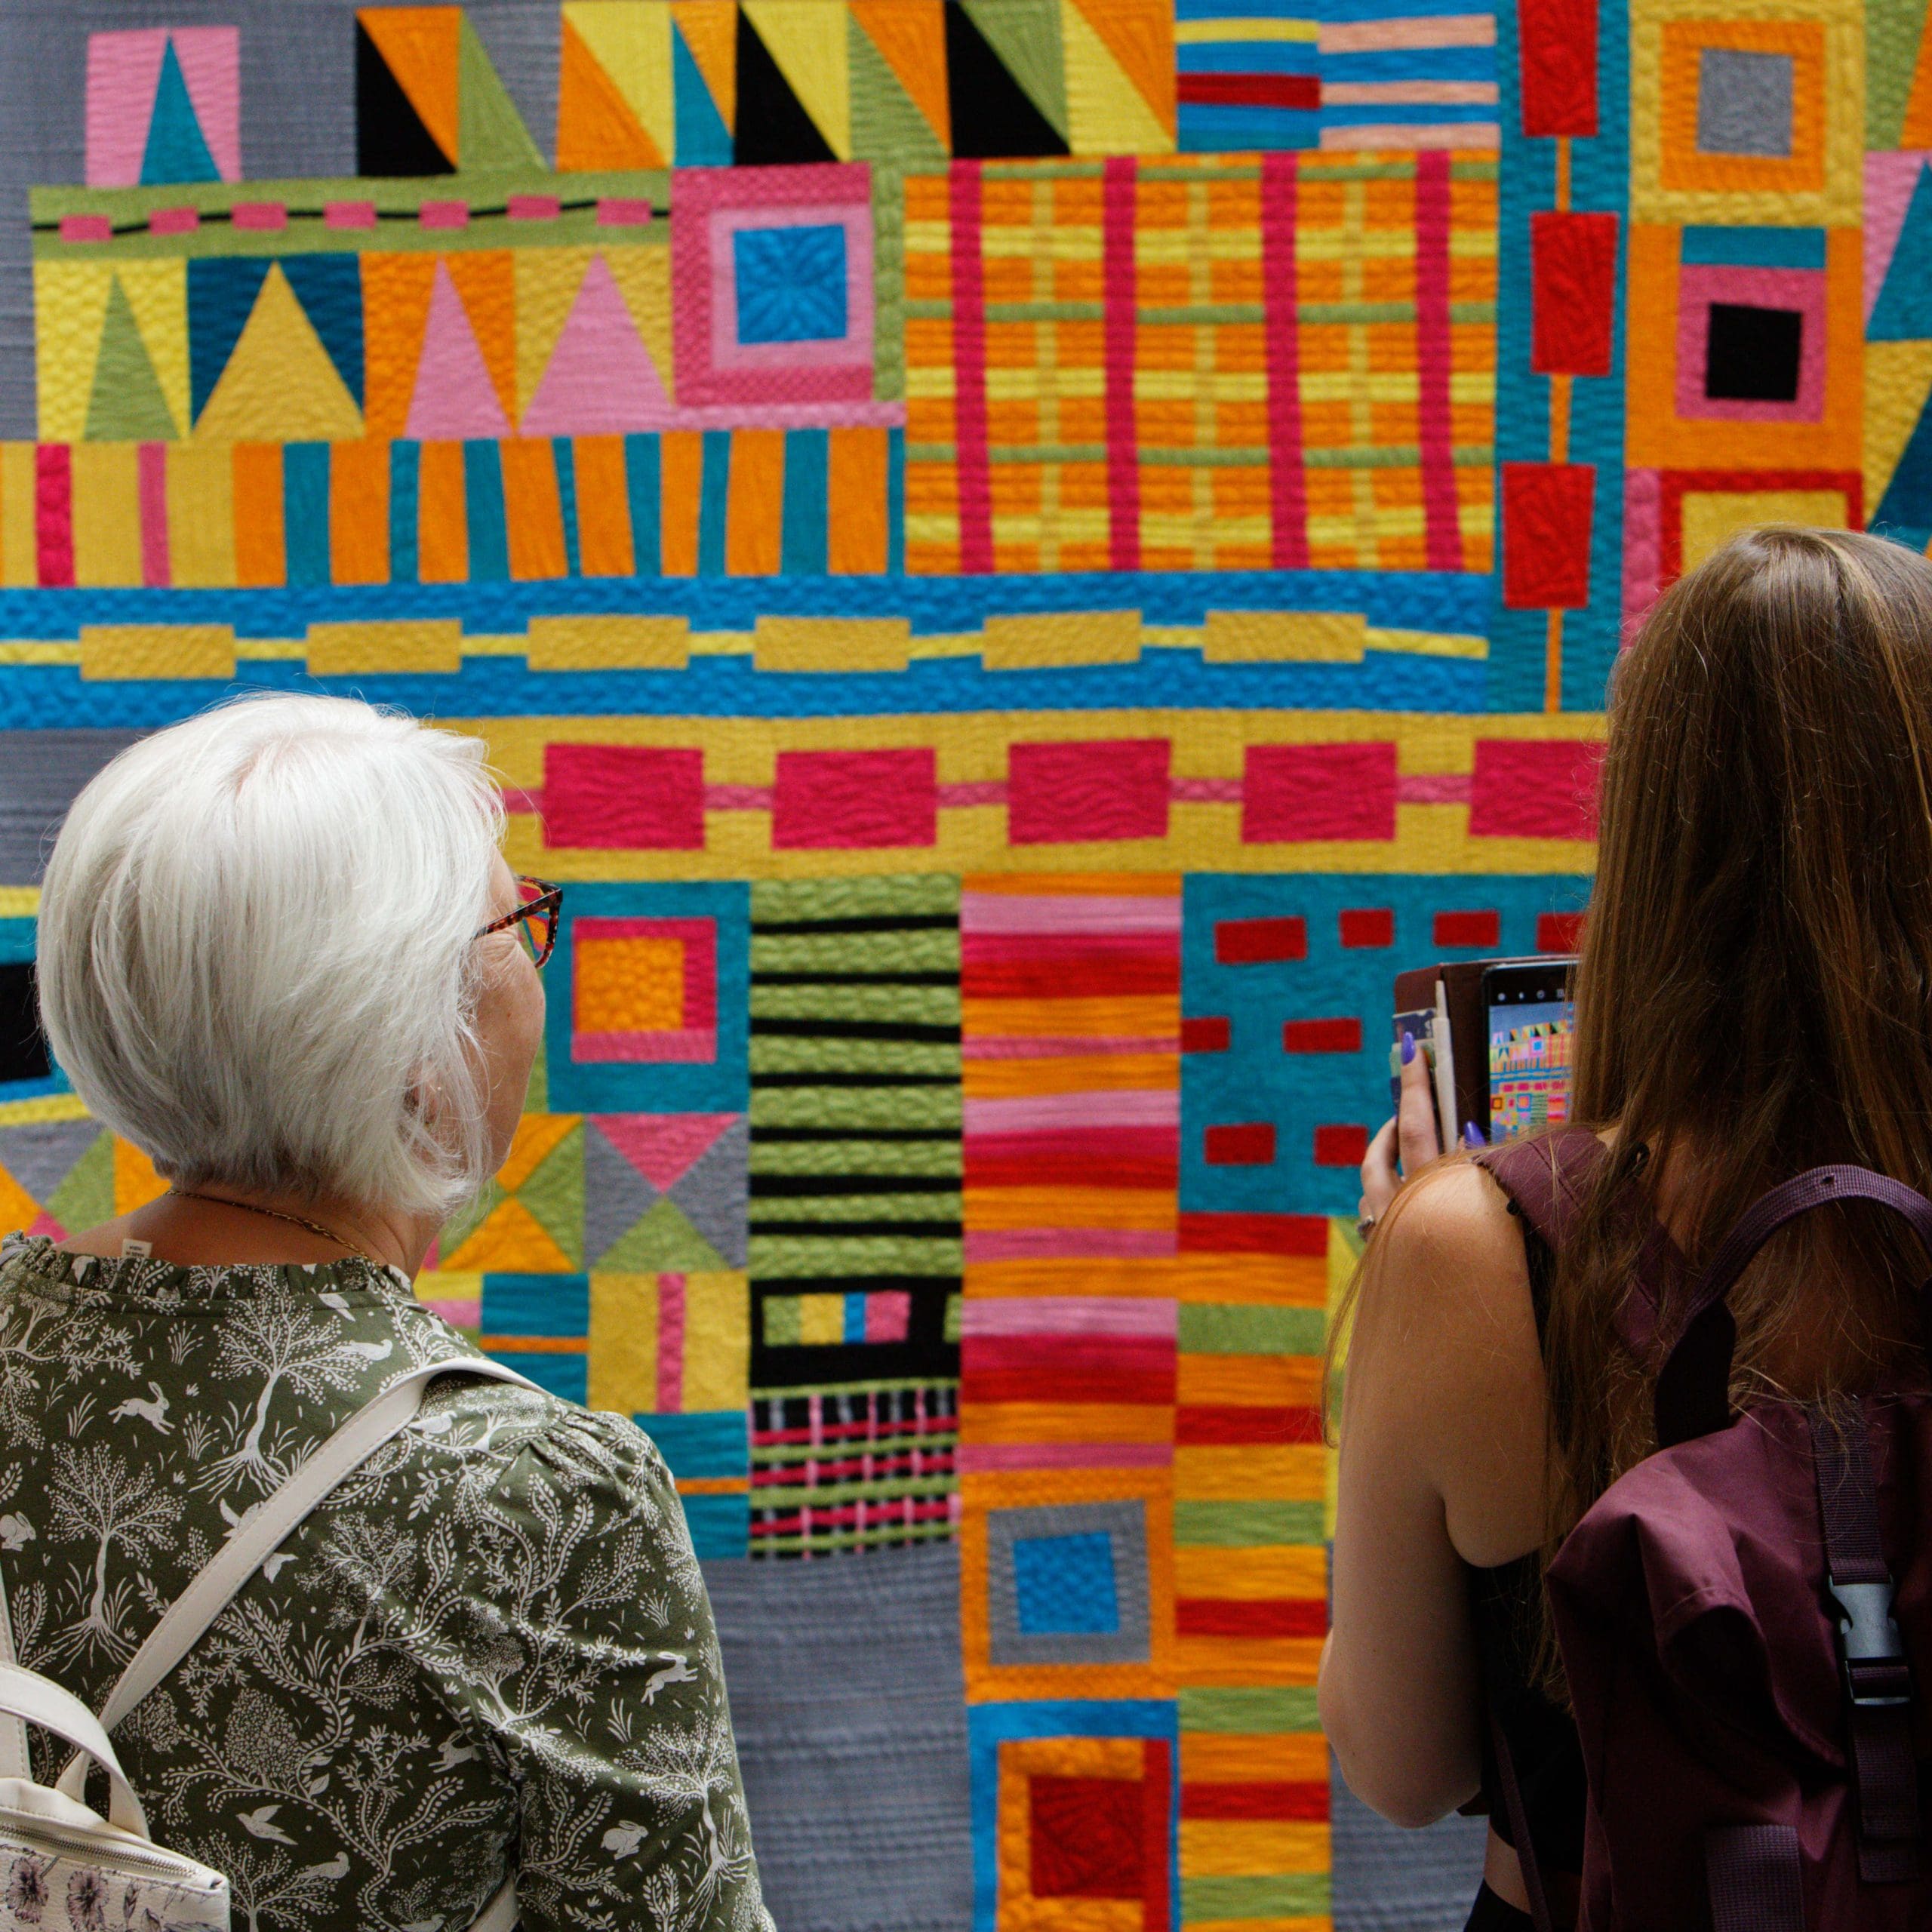 Viewing colourful quilt